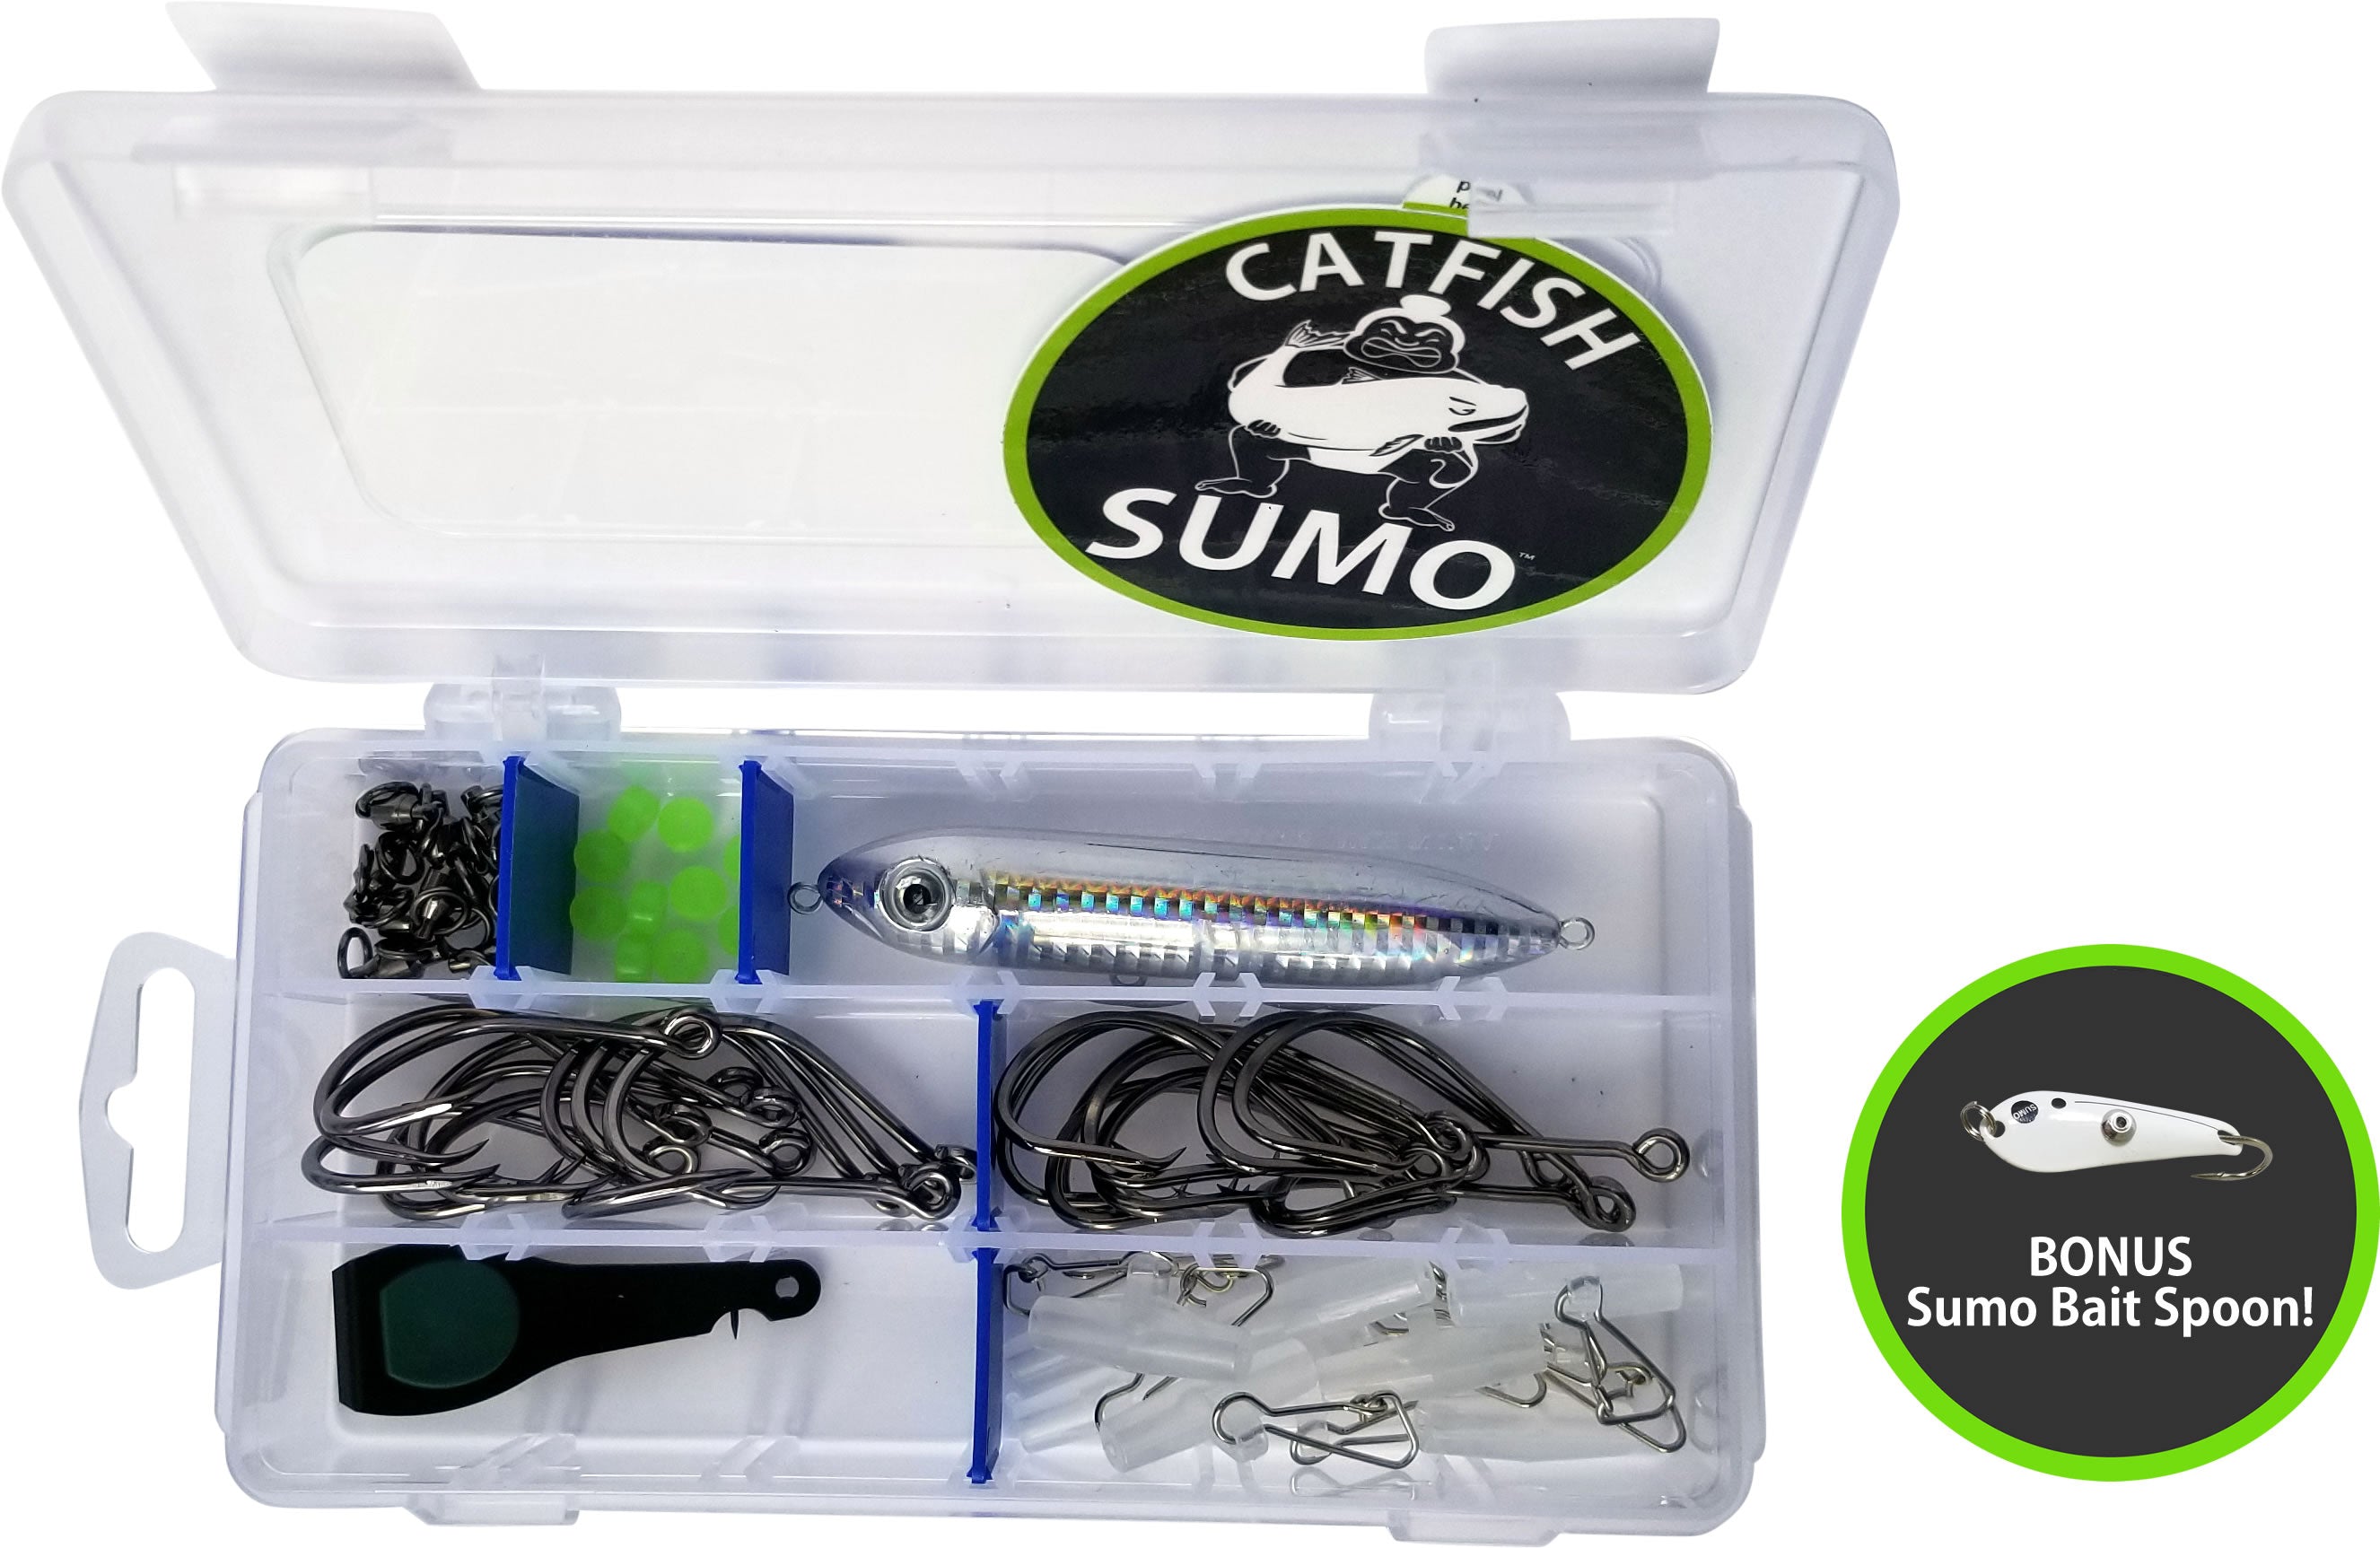 Catfish Tackle - Major brands stocked for all your Catfishing